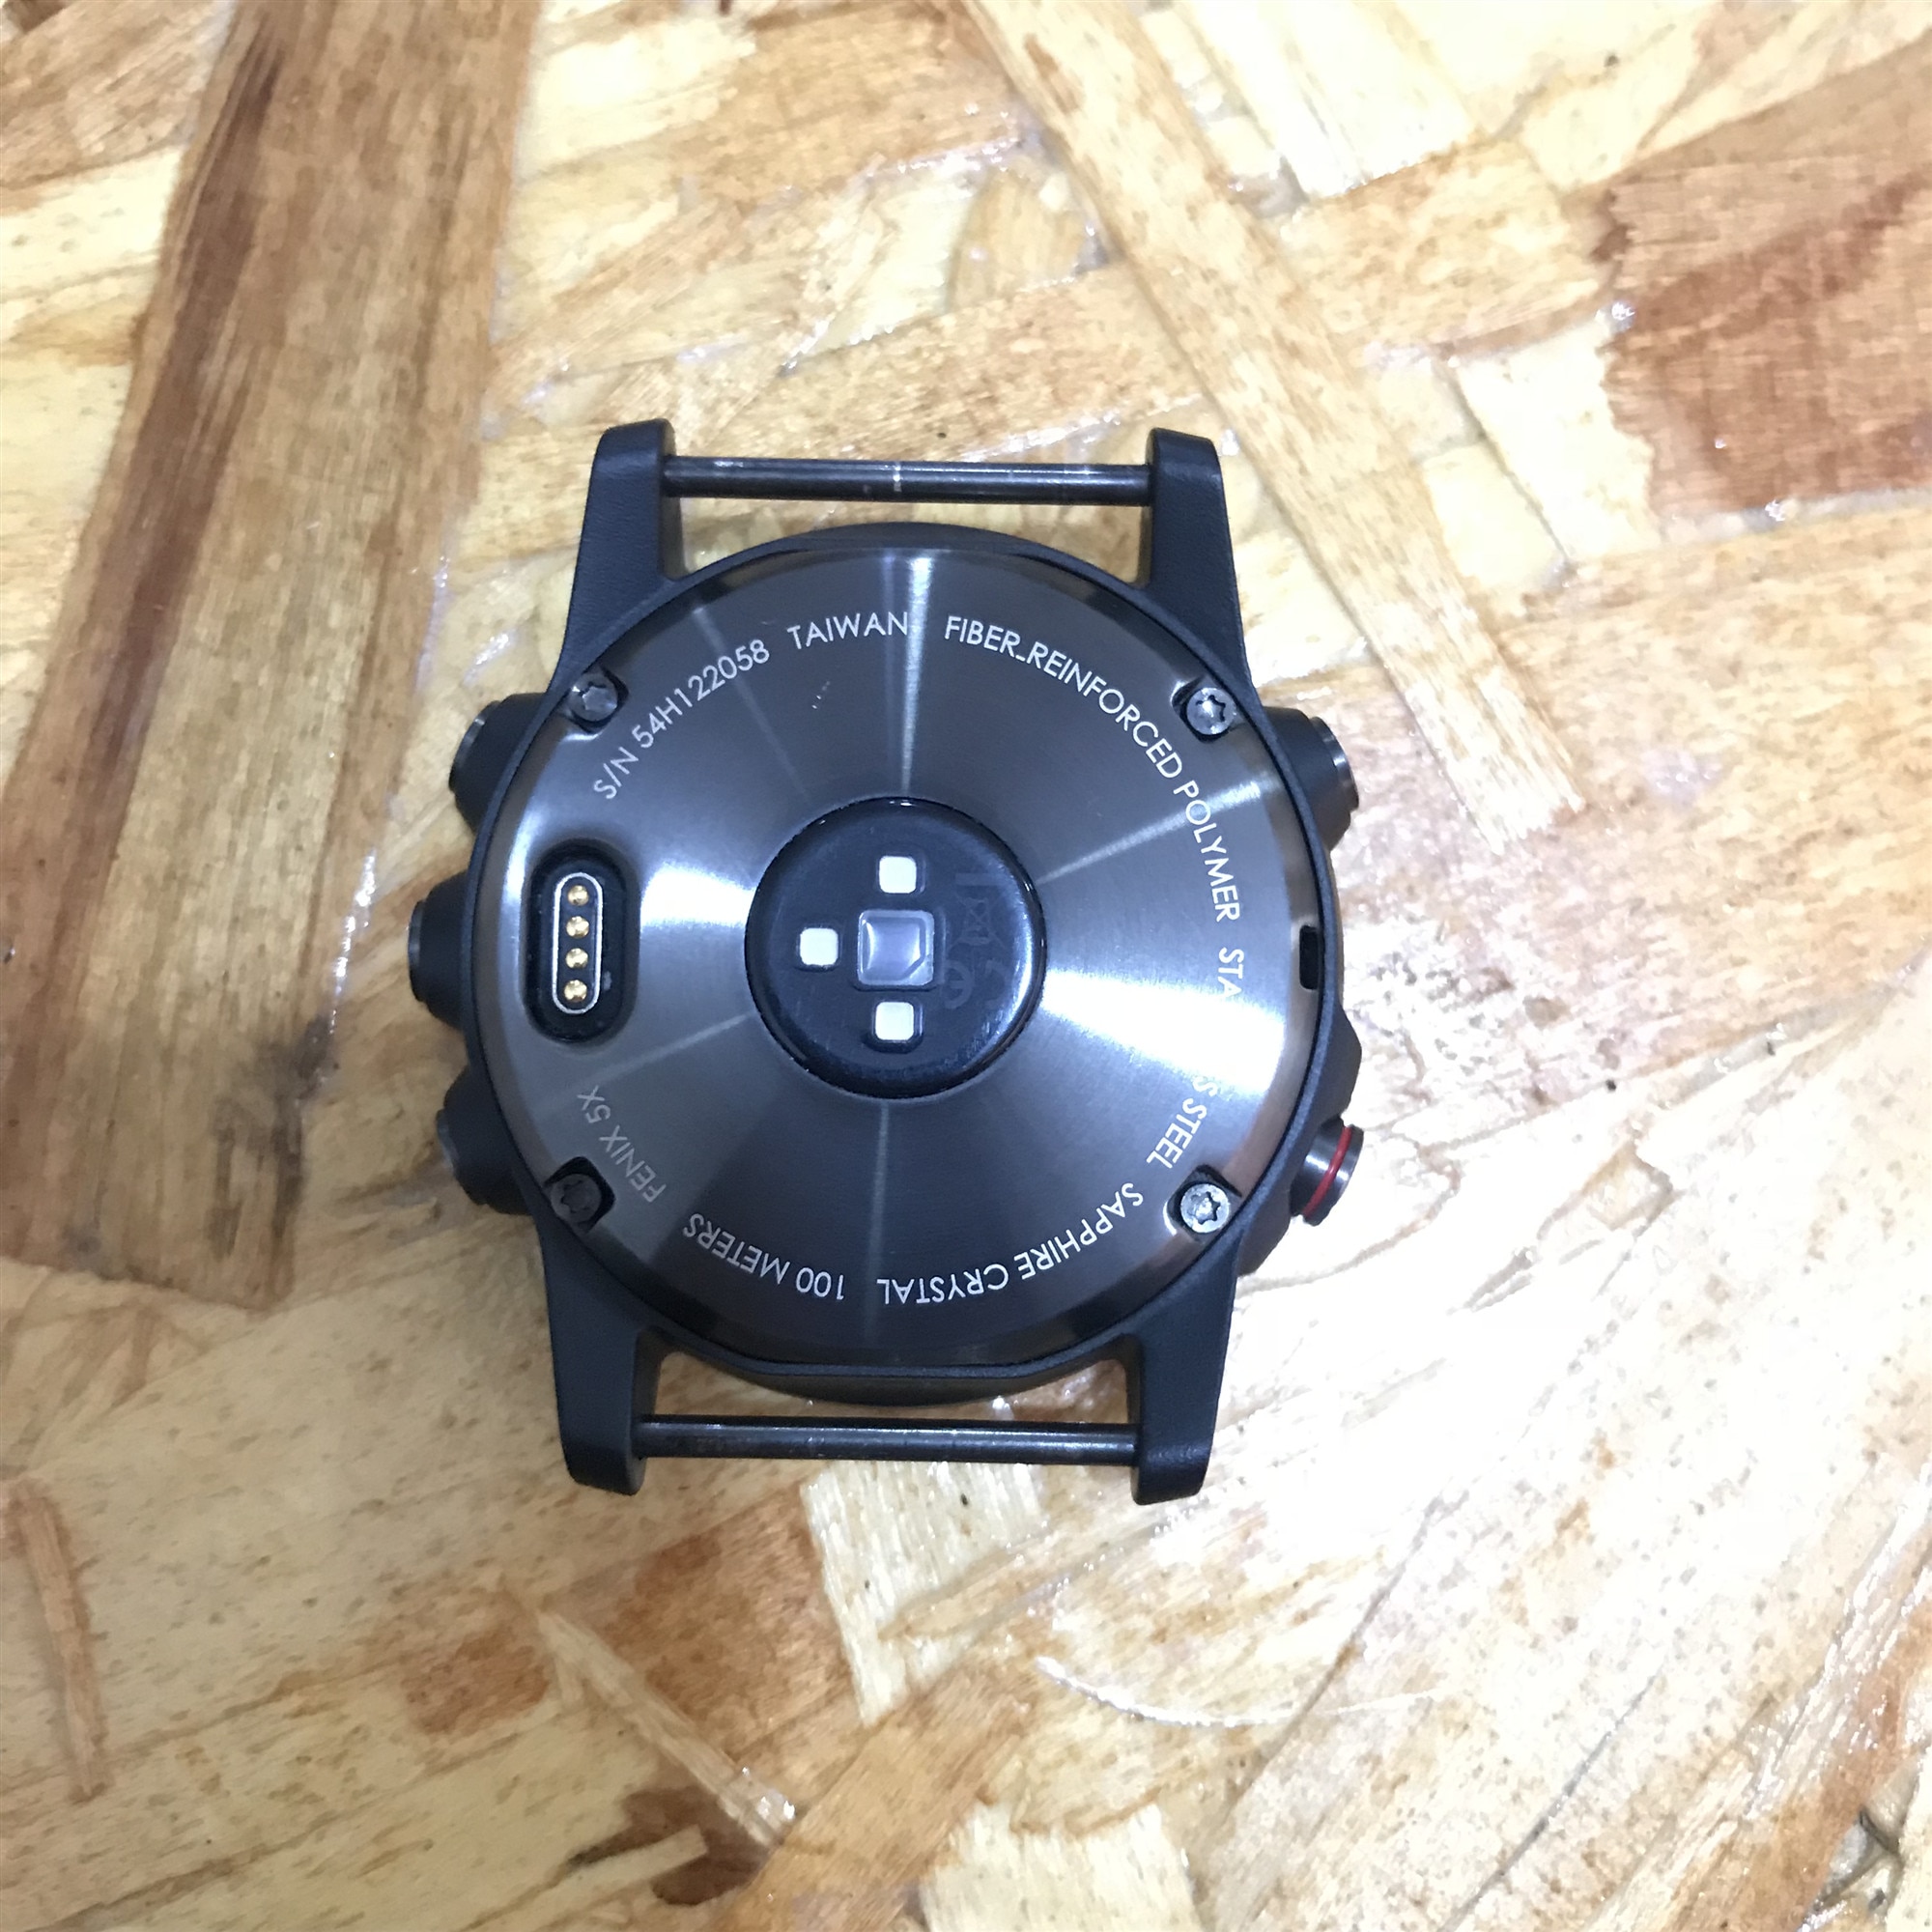 For Fenix 5X Rear cover repair and replacement With motor vibrator / heart rate sensor / Barometer Apply to GARMIN FENIX 5x